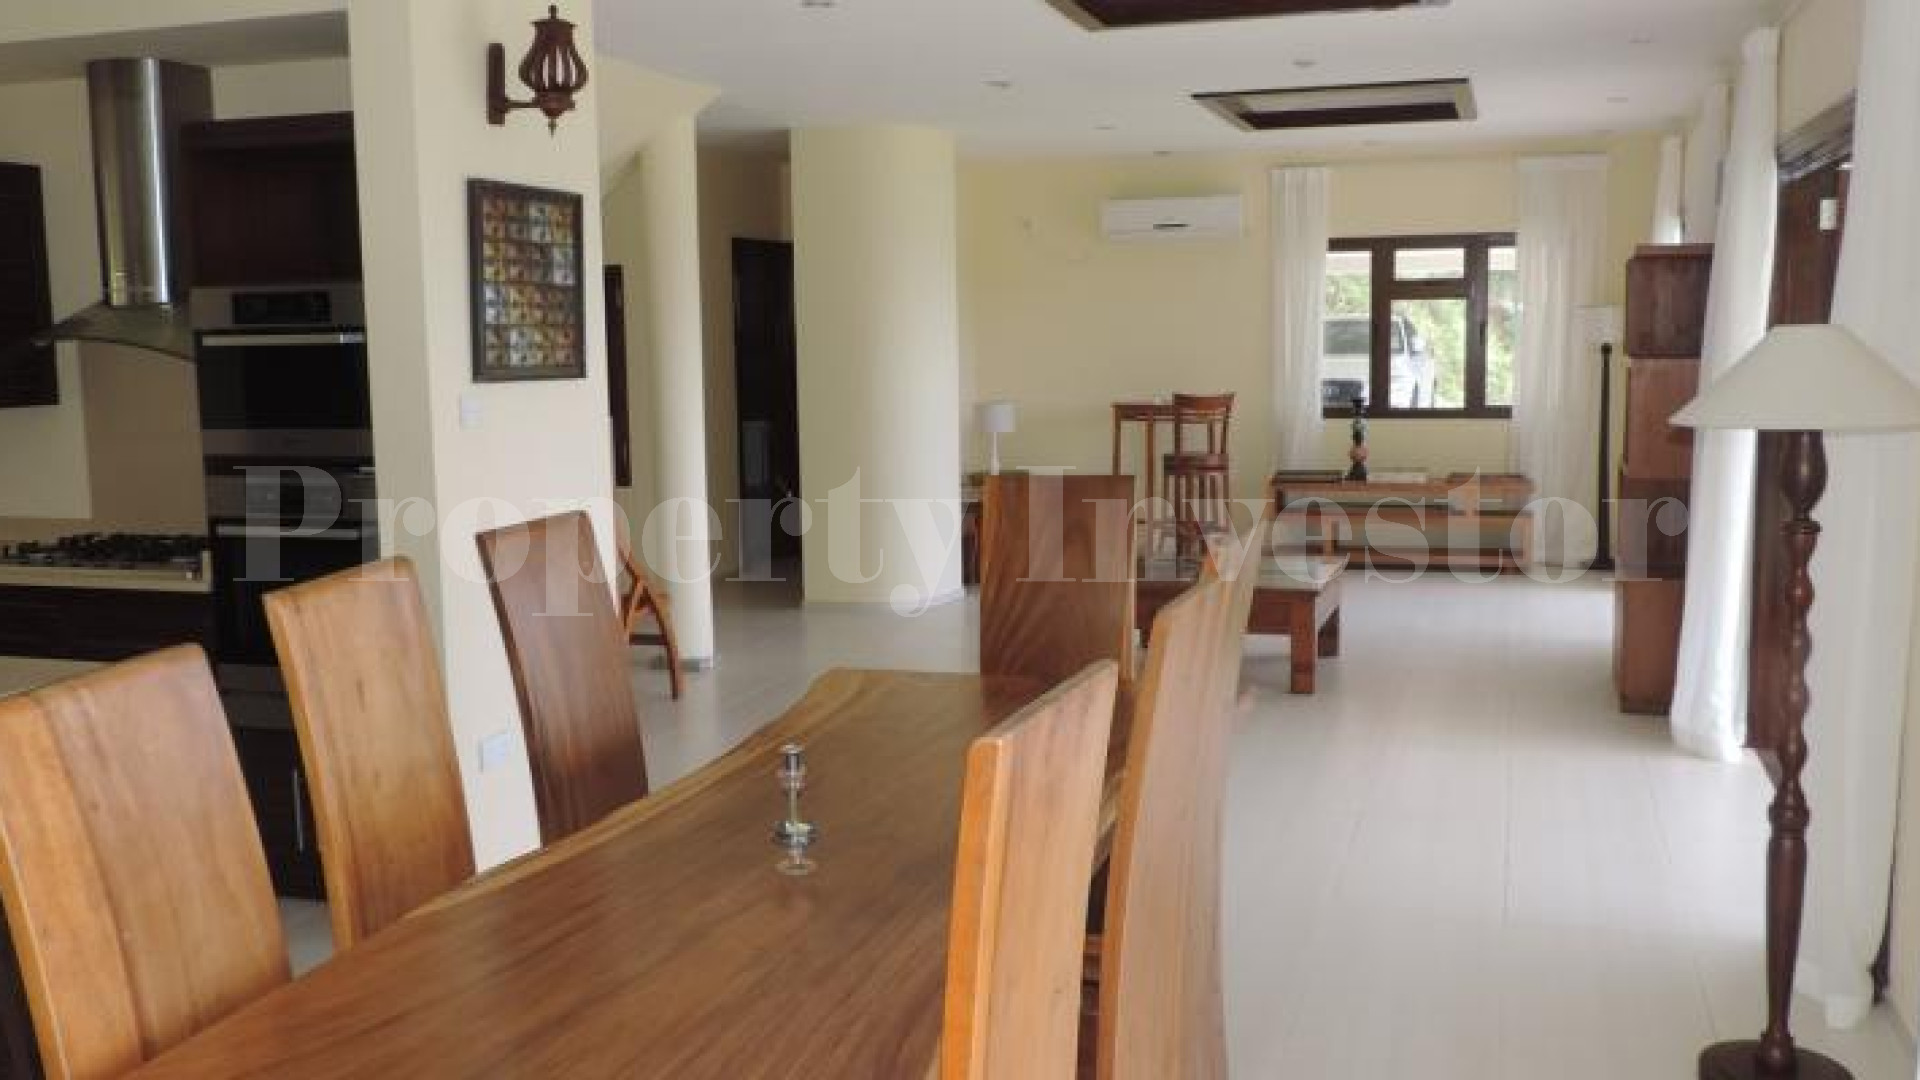 A Grand 5 Bedroom Seaview Villa with Expansive Lot for Sale in Mahé, Seychelles